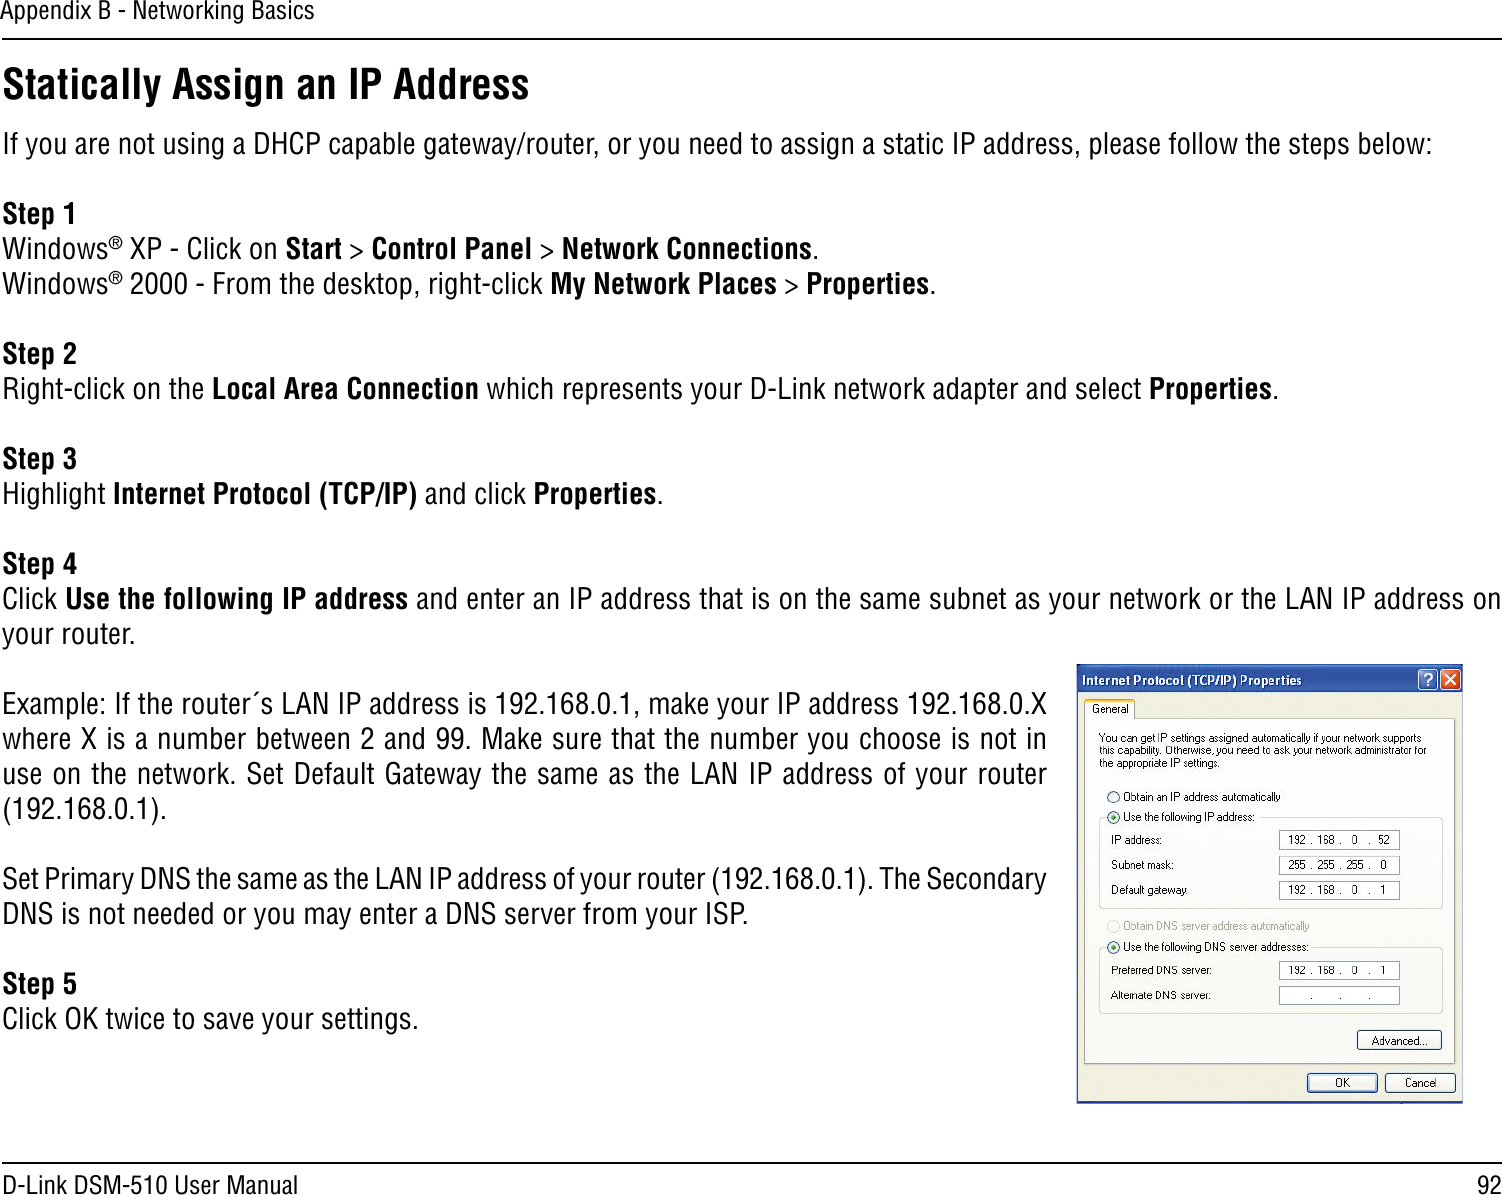 92D-Link DSM-510 User ManualAppendix B - Networking BasicsStatically Assign an IP AddressIf you are not using a DHCP capable gateway/router, or you need to assign a static IP address, please follow the steps below:Step 1Windows® XP - Click on Start &gt; Control Panel &gt; Network Connections.Windows® 2000 - From the desktop, right-click My Network Places &gt; Properties.Step 2Right-click on the Local Area Connection which represents your D-Link network adapter and select Properties.Step 3Highlight Internet Protocol (TCP/IP) and click Properties.Step 4Click Use the following IP address and enter an IP address that is on the same subnet as your network or the LAN IP address on your router. Example: If the router´s LAN IP address is 192.168.0.1, make your IP address 192.168.0.X where X is a number between 2 and 99. Make sure that the number you choose is not in use on the network. Set Default Gateway the same as the LAN IP address of your router (192.168.0.1). Set Primary DNS the same as the LAN IP address of your router (192.168.0.1). The Secondary DNS is not needed or you may enter a DNS server from your ISP.Step 5Click OK twice to save your settings.